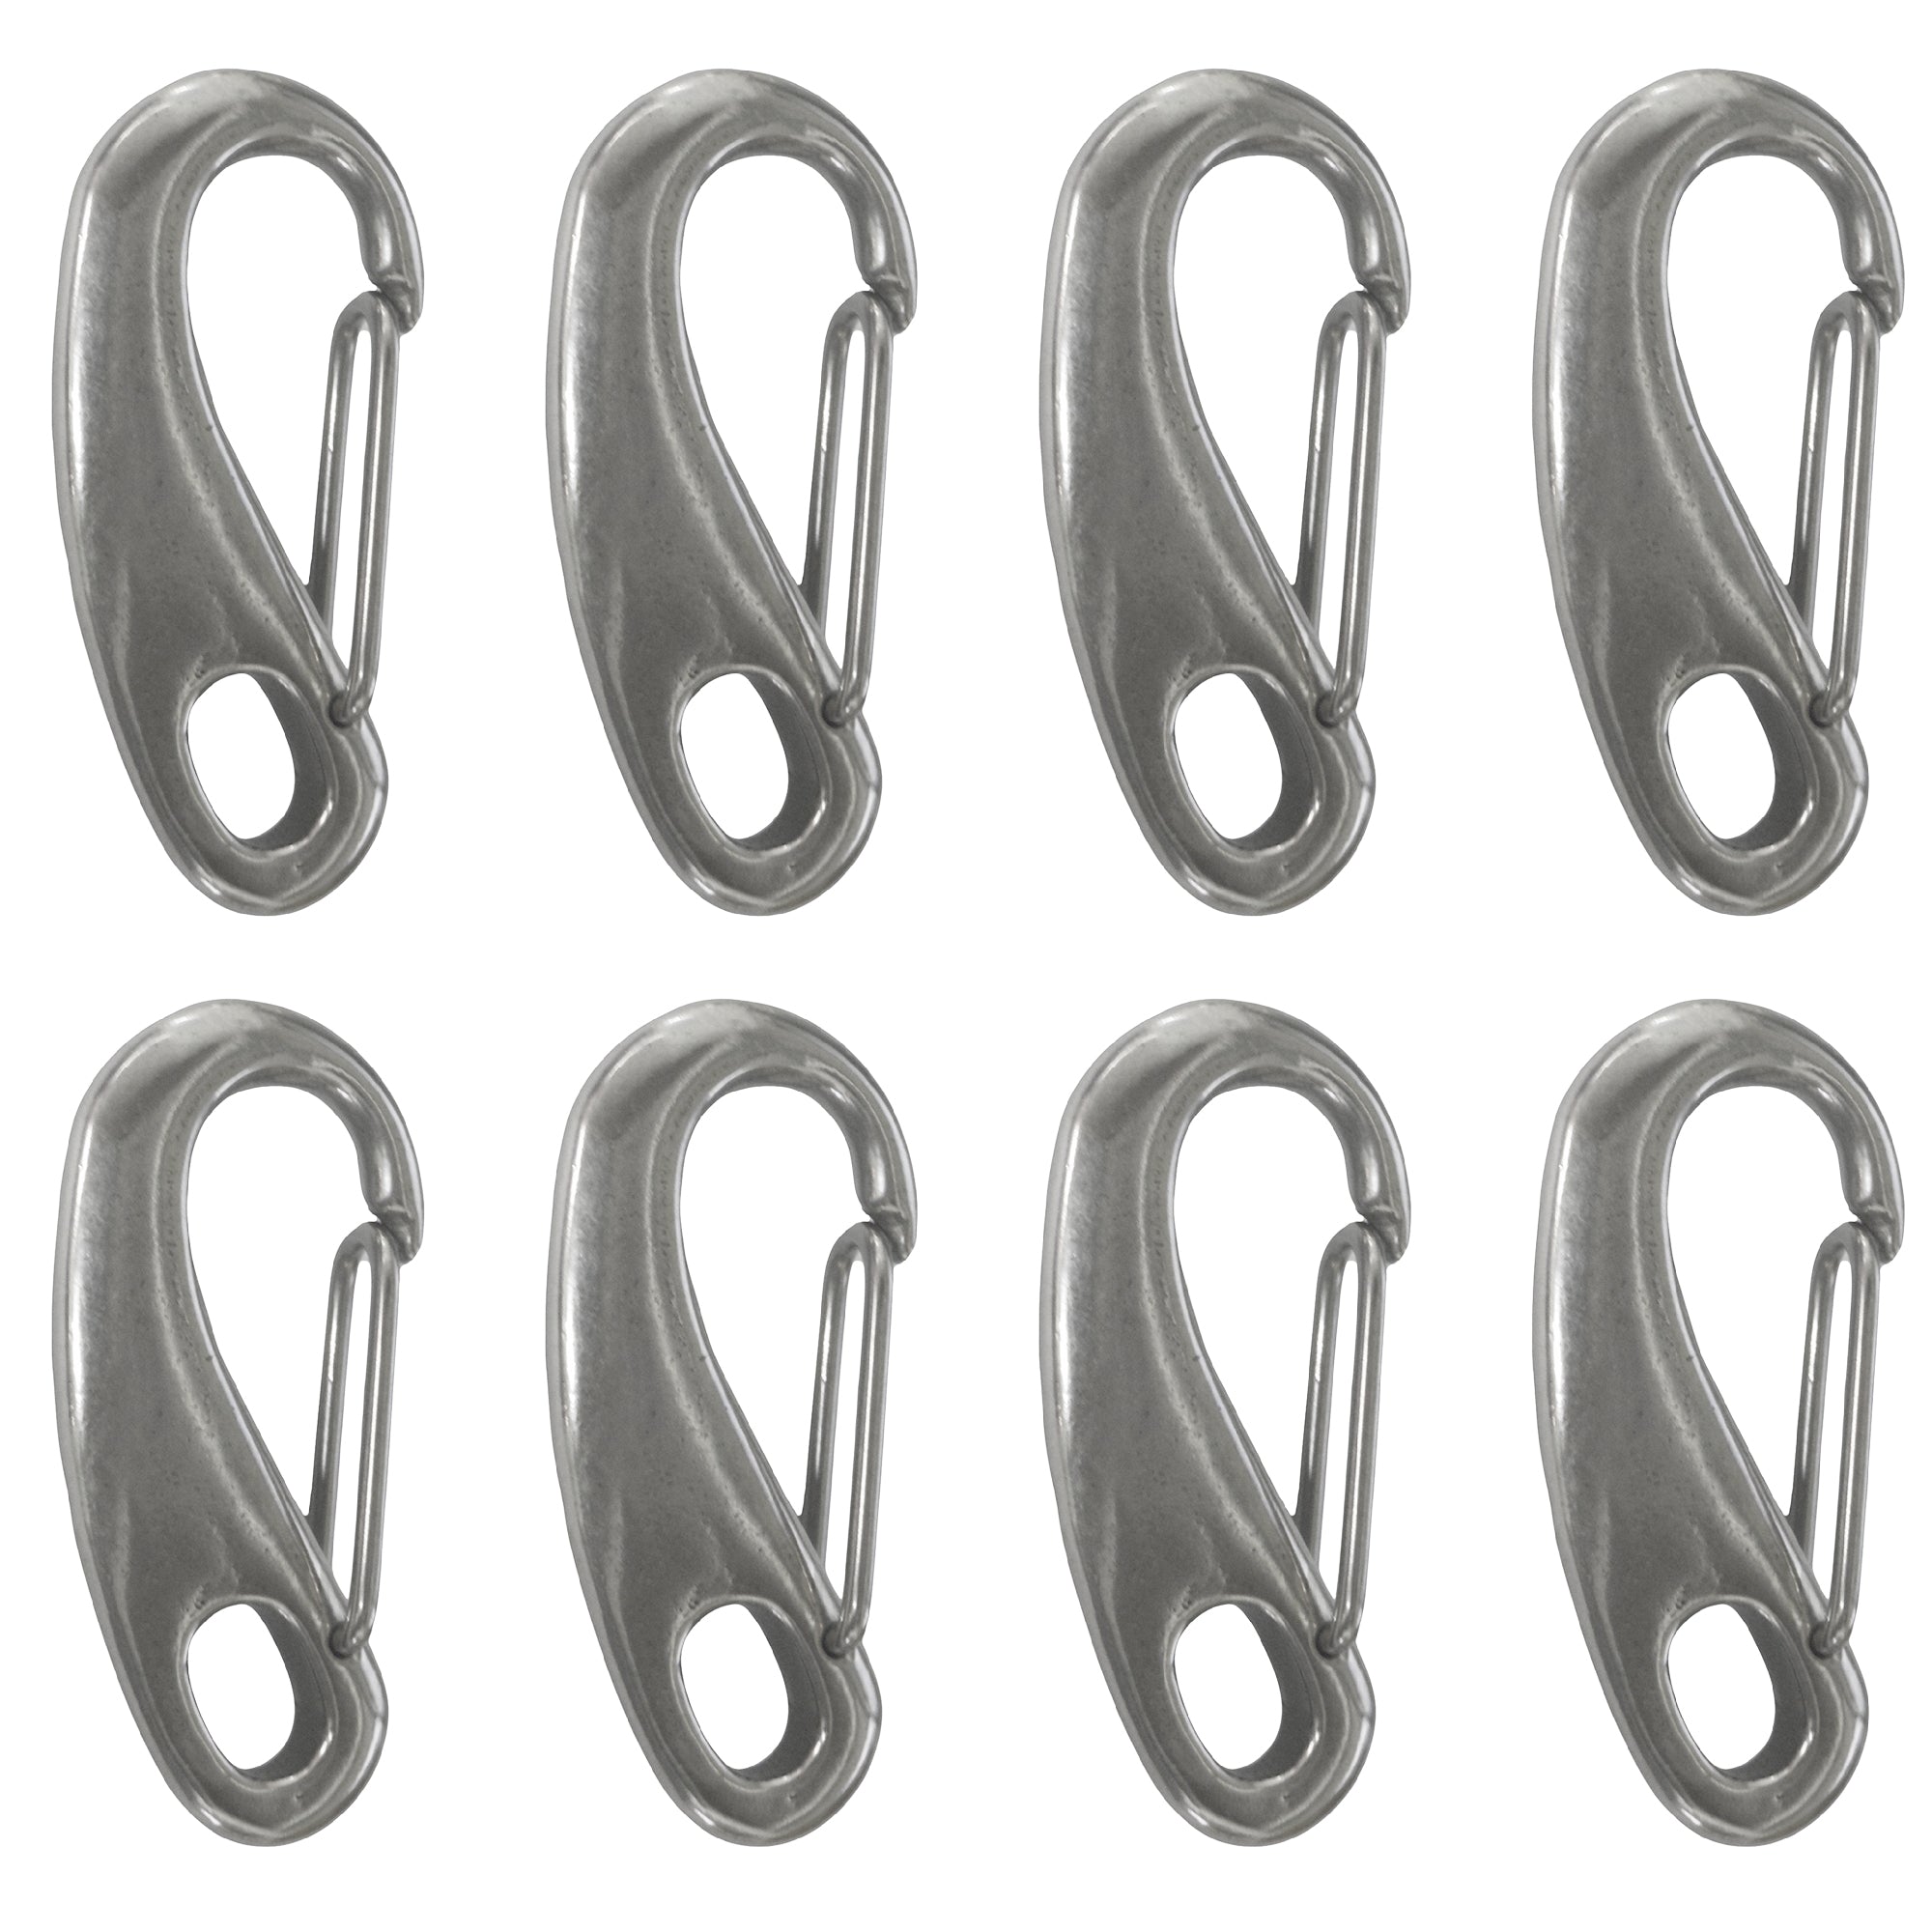 Spring Gate Snap Hook, 2" Stainless Steel 8-Pack - FO461-M8